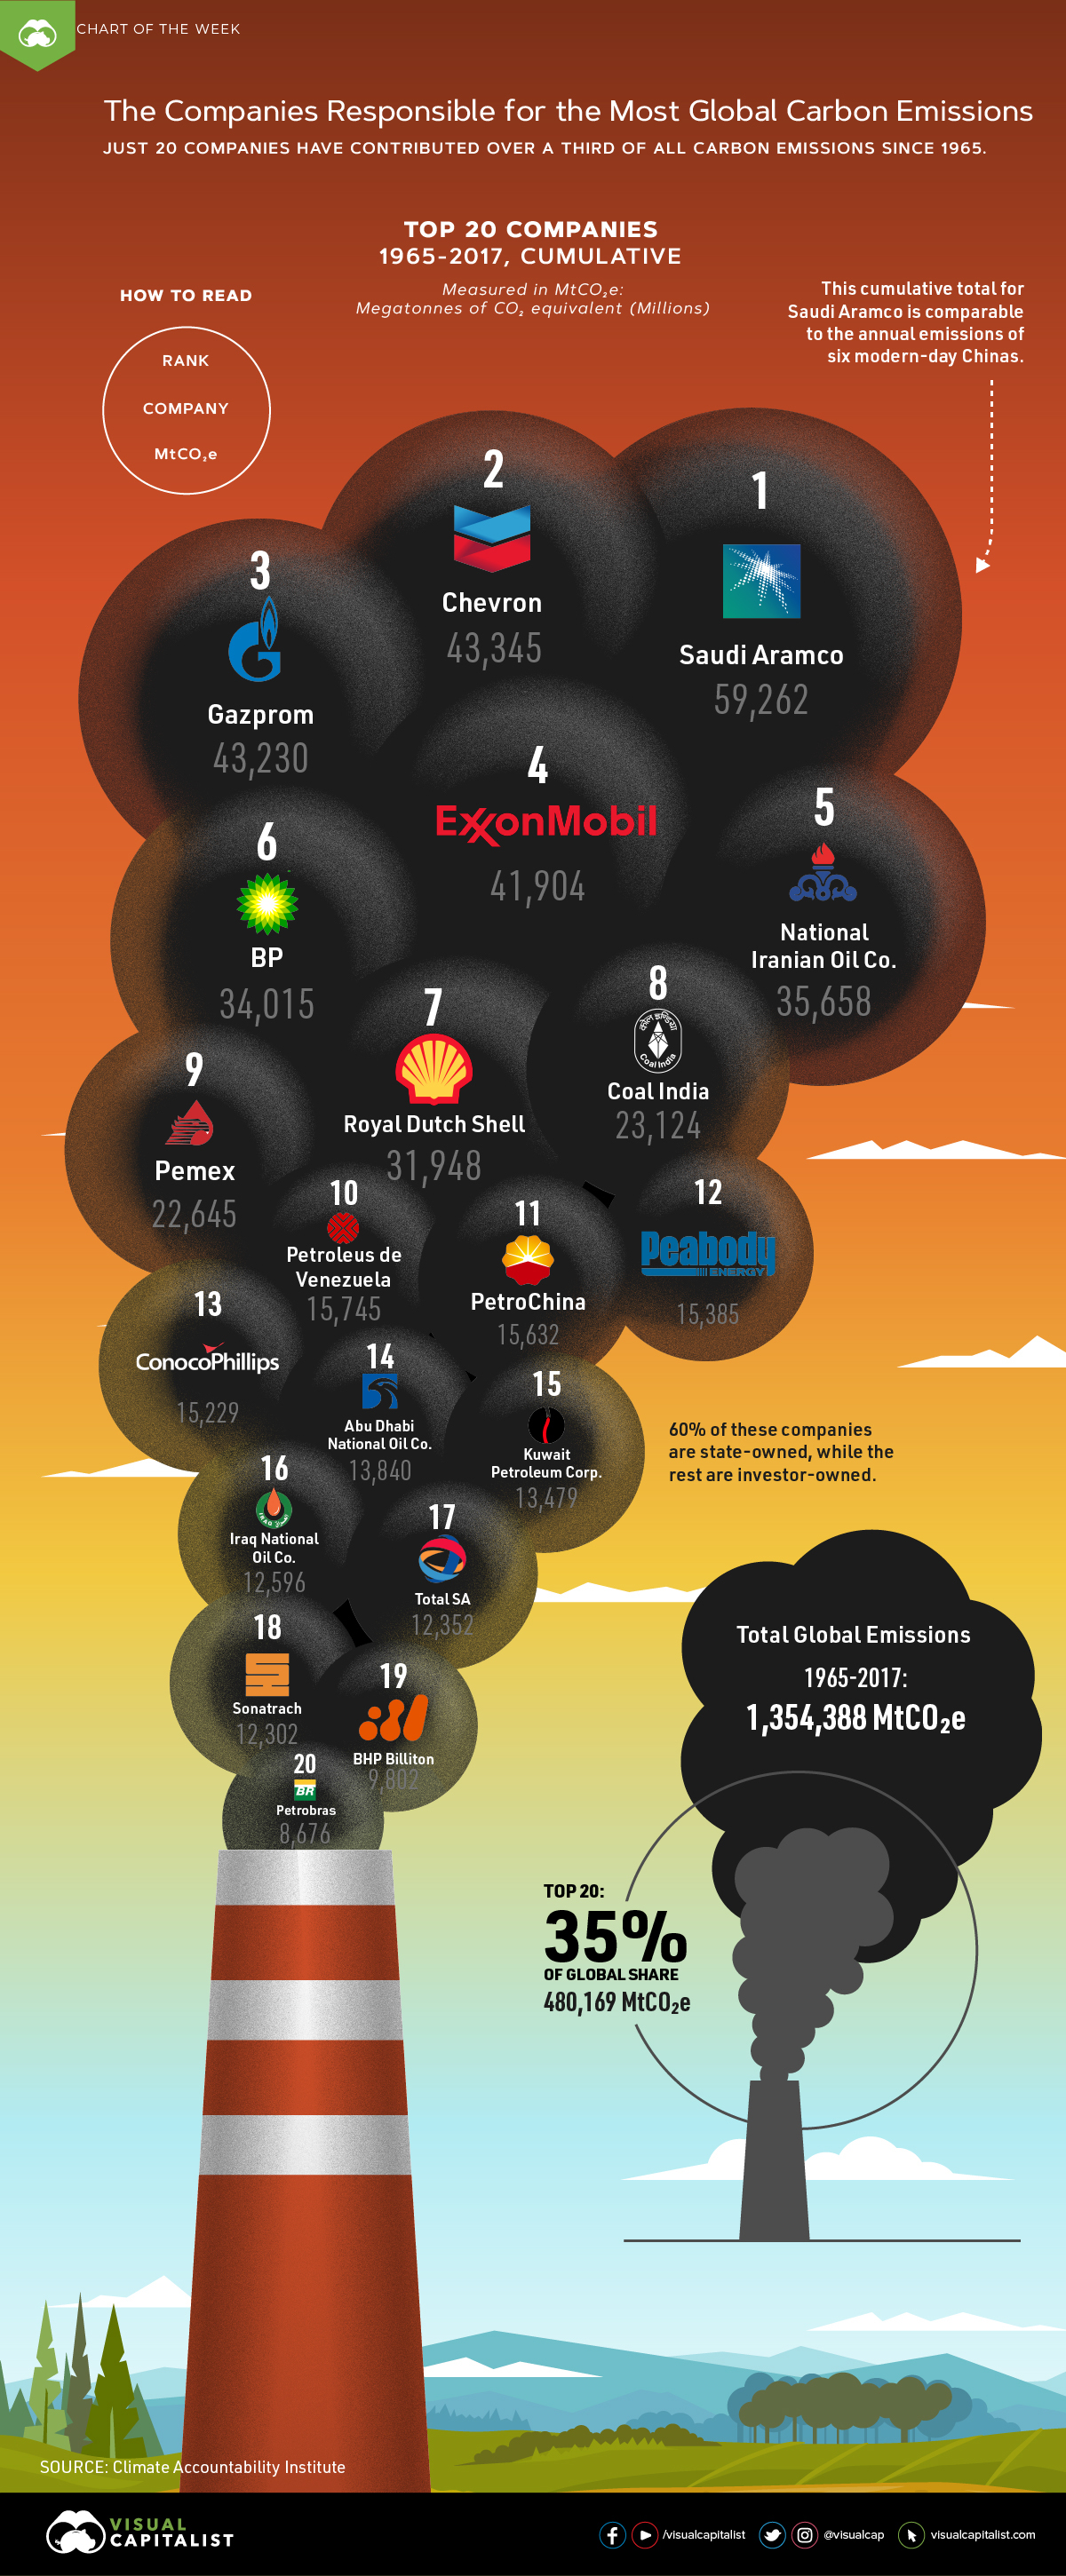 Which Companies Responsible For the Most Carbon